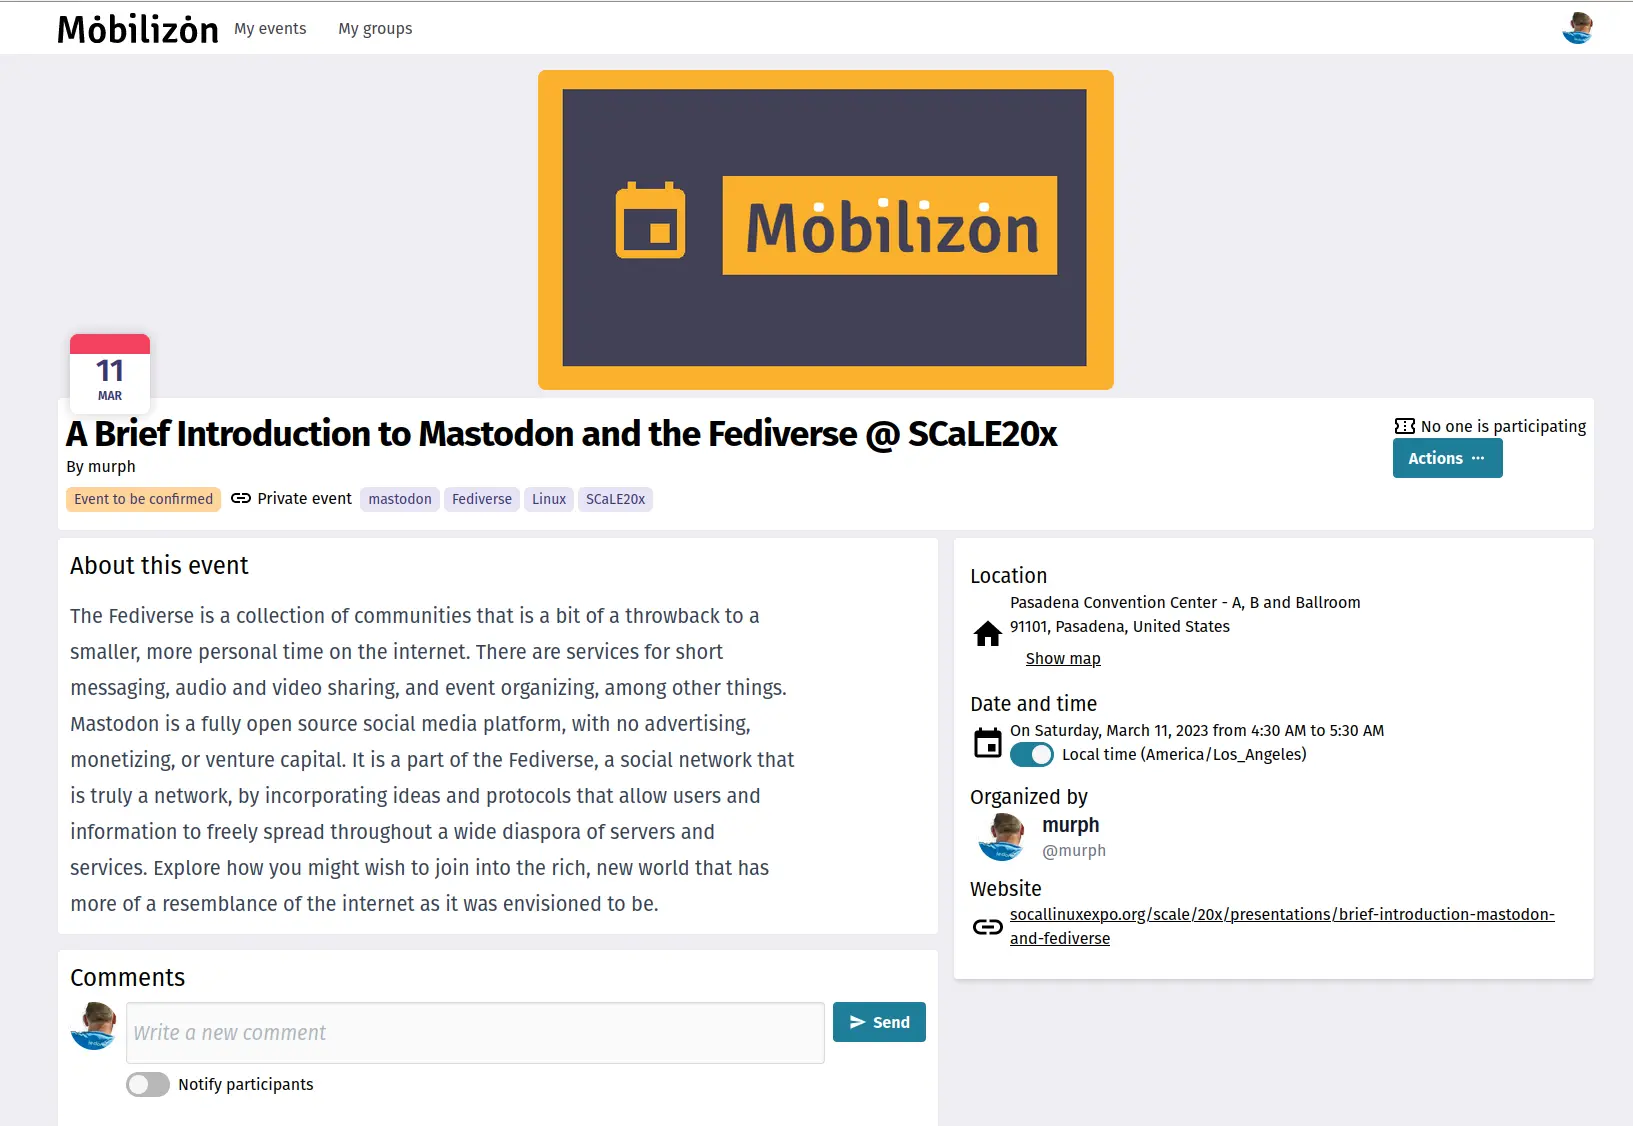 The Mobilizon interface helps you plan events.